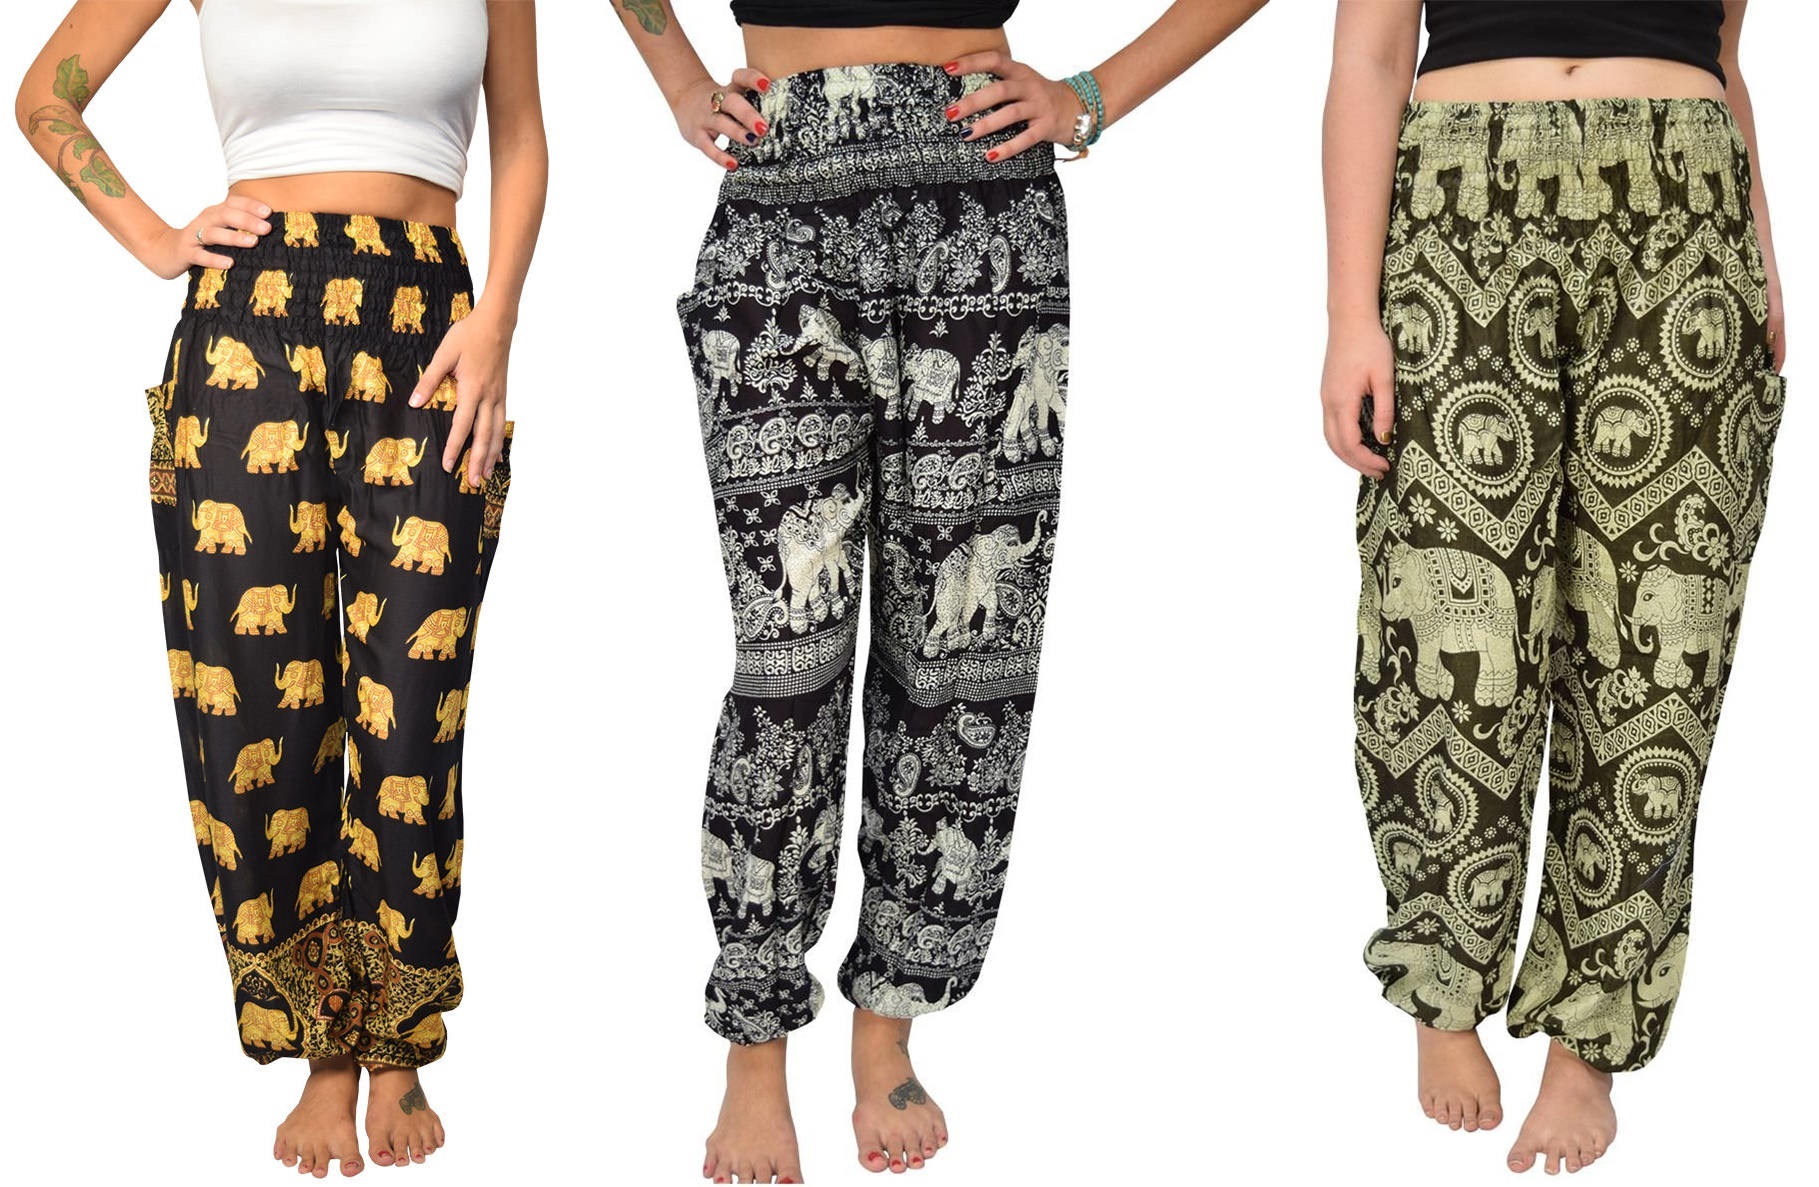 The Elephant Pants: Look Good While Saving the Elephants this